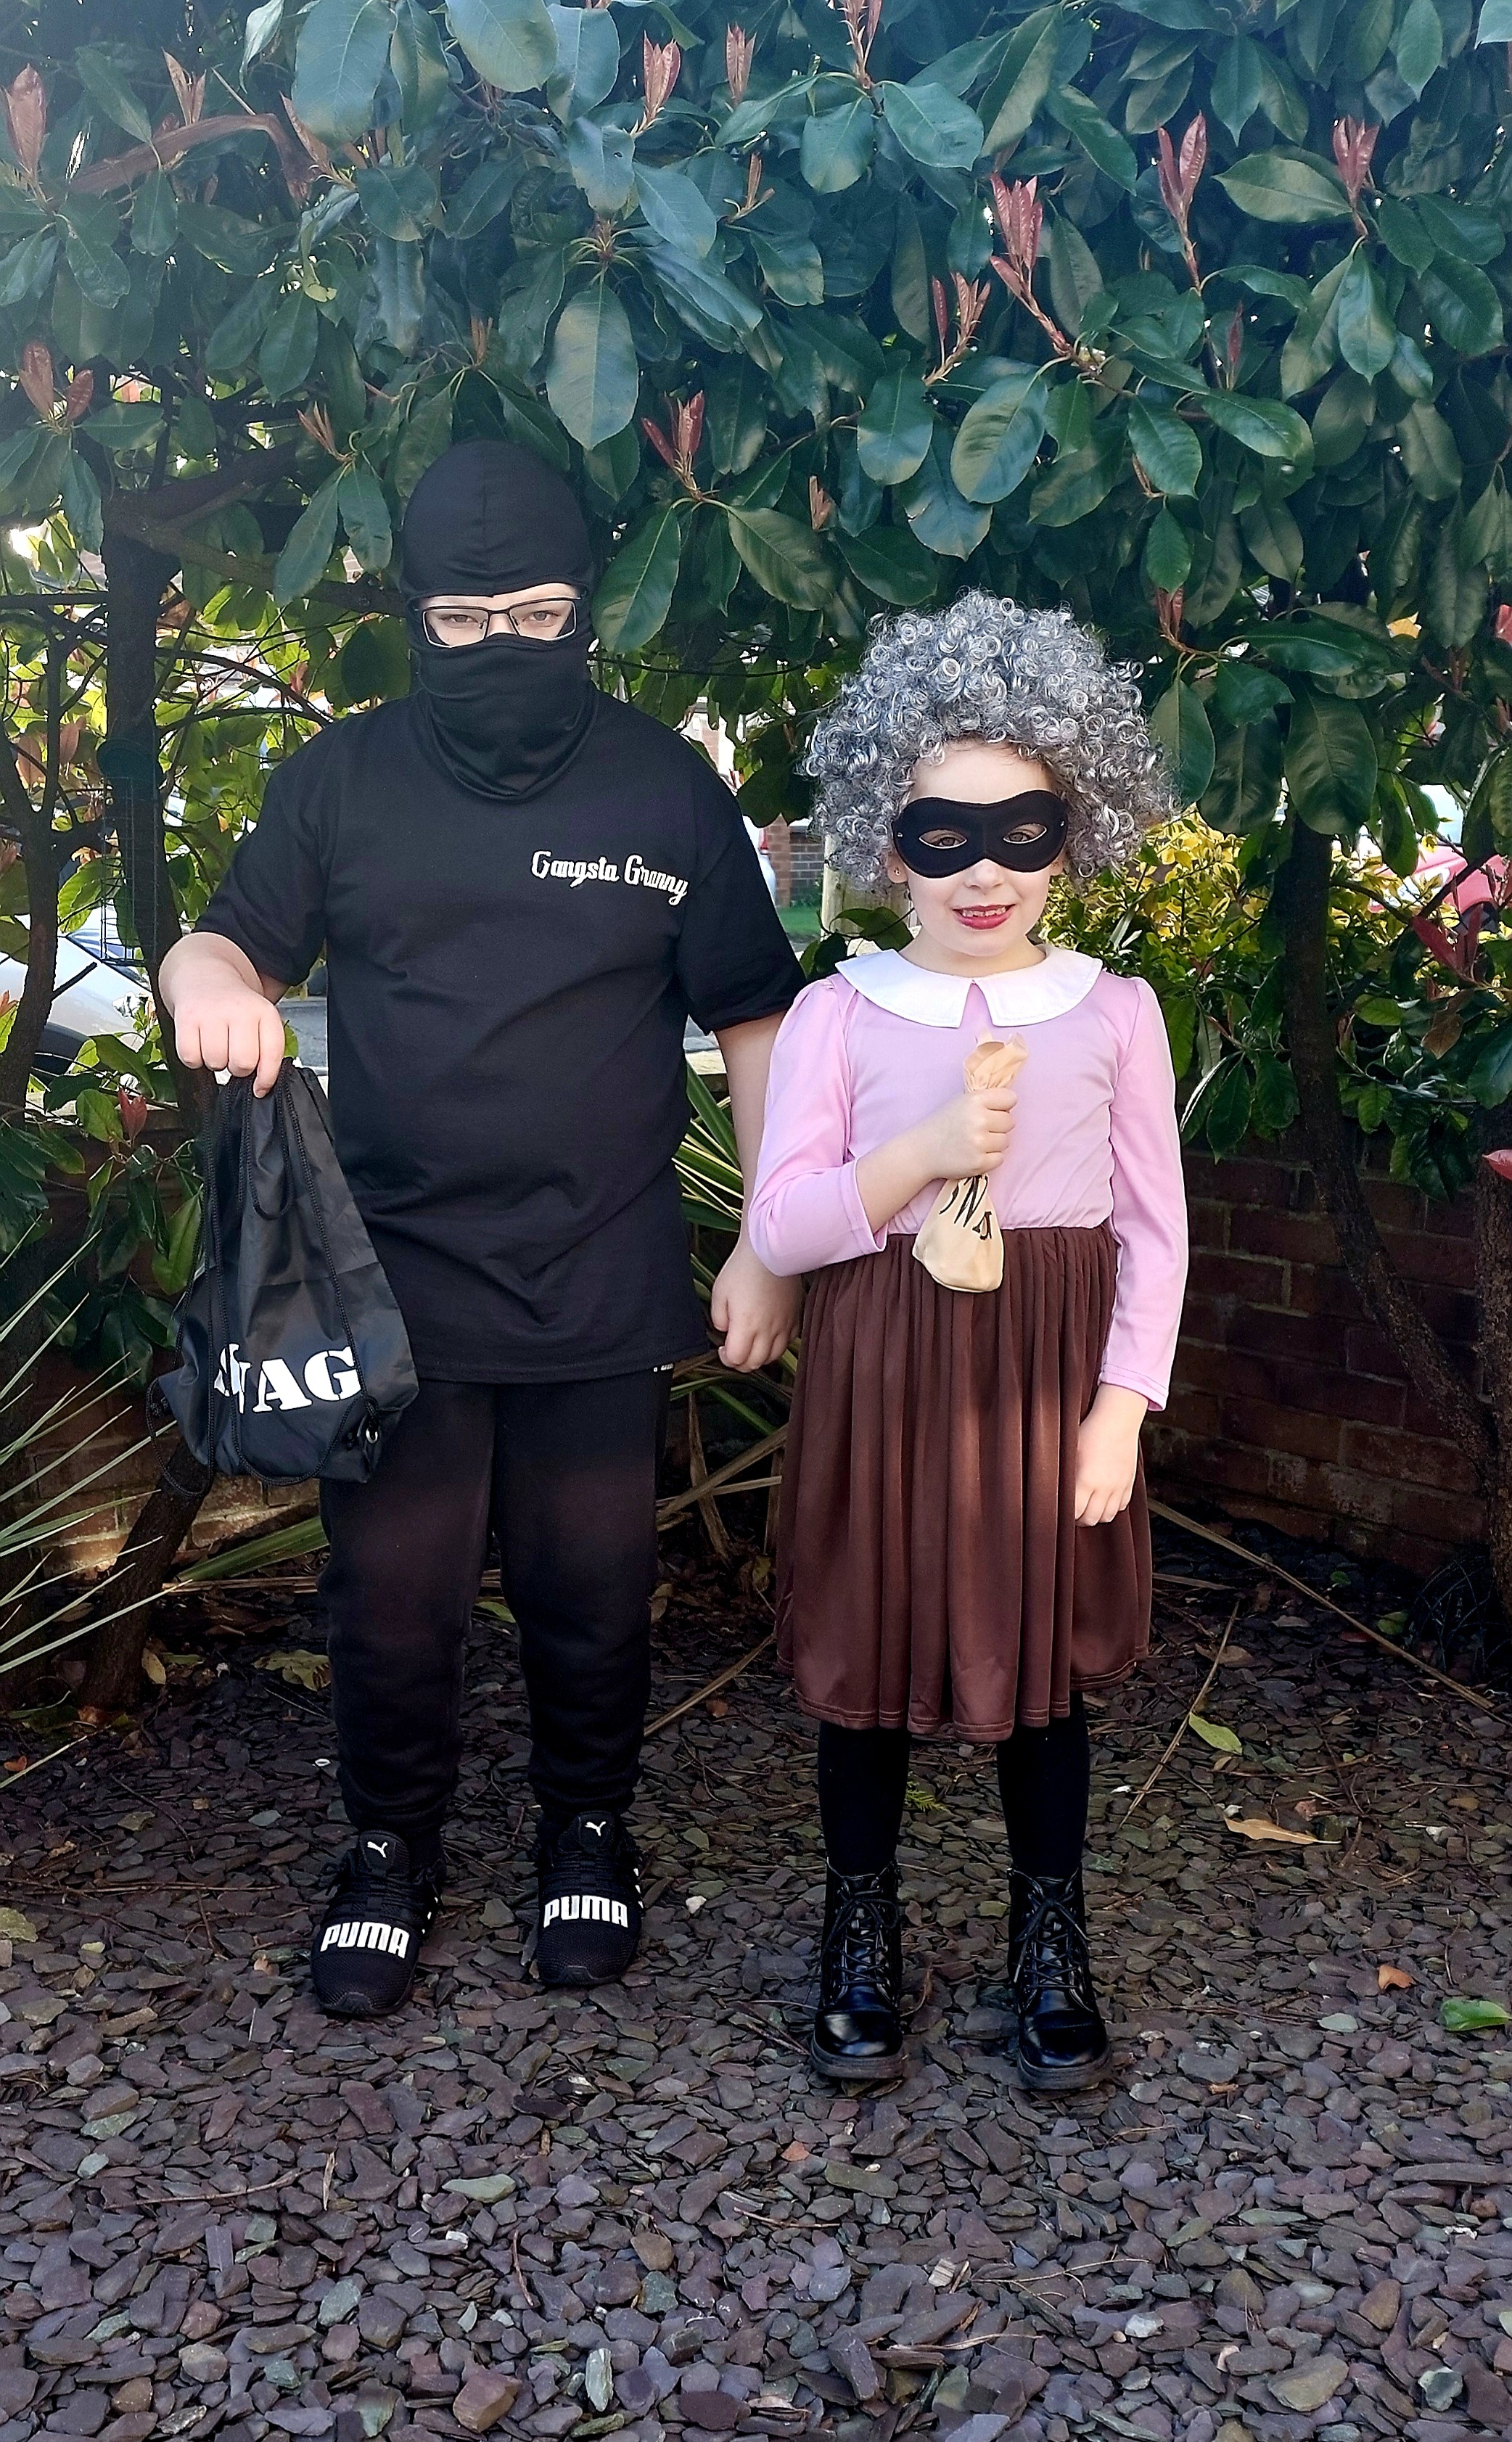 Harry and Isla from Ashurst Primary School as characters from Gangsta Granny